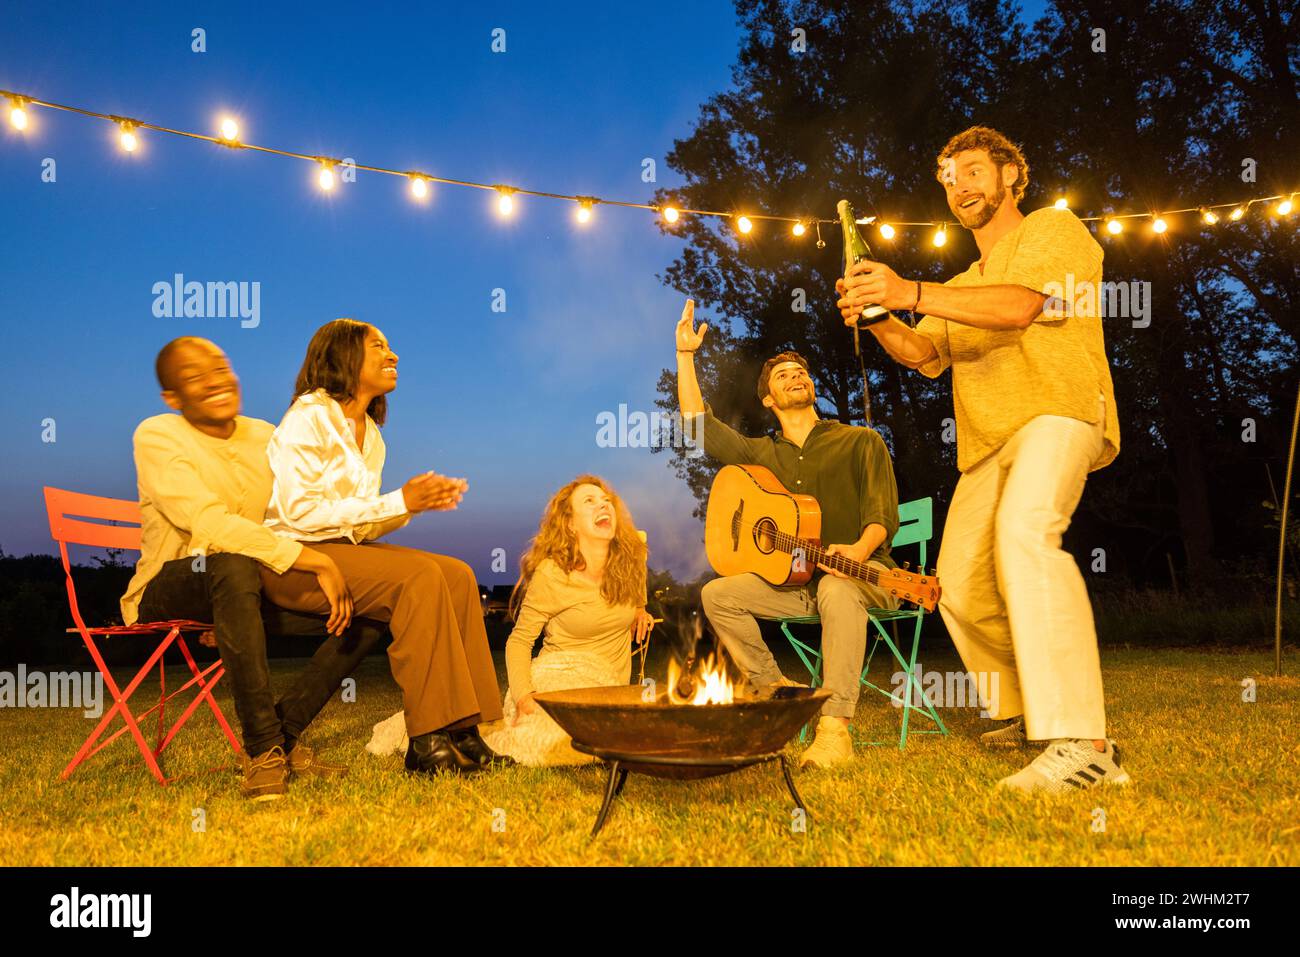 Vibrant Garden Party: Friends Unite with Music and Laughter, a multi ethnic group of friends on a garden party in the evening ha Stock Photo